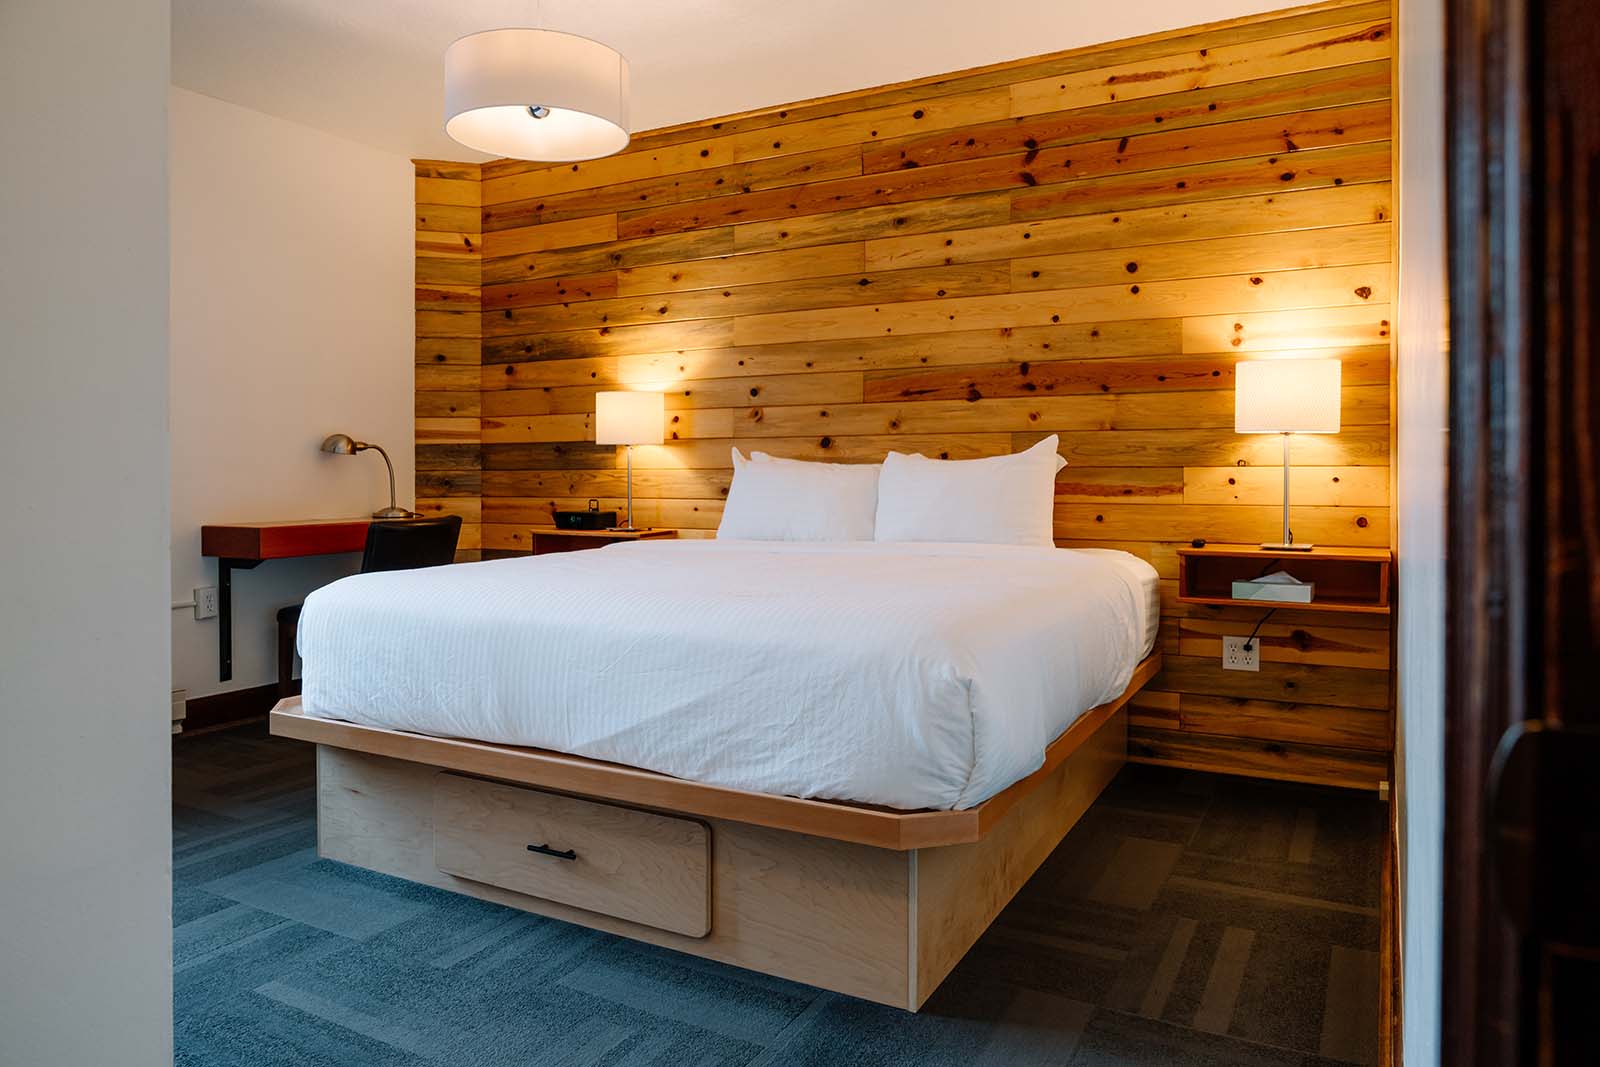 King room bed with natural wall paneling